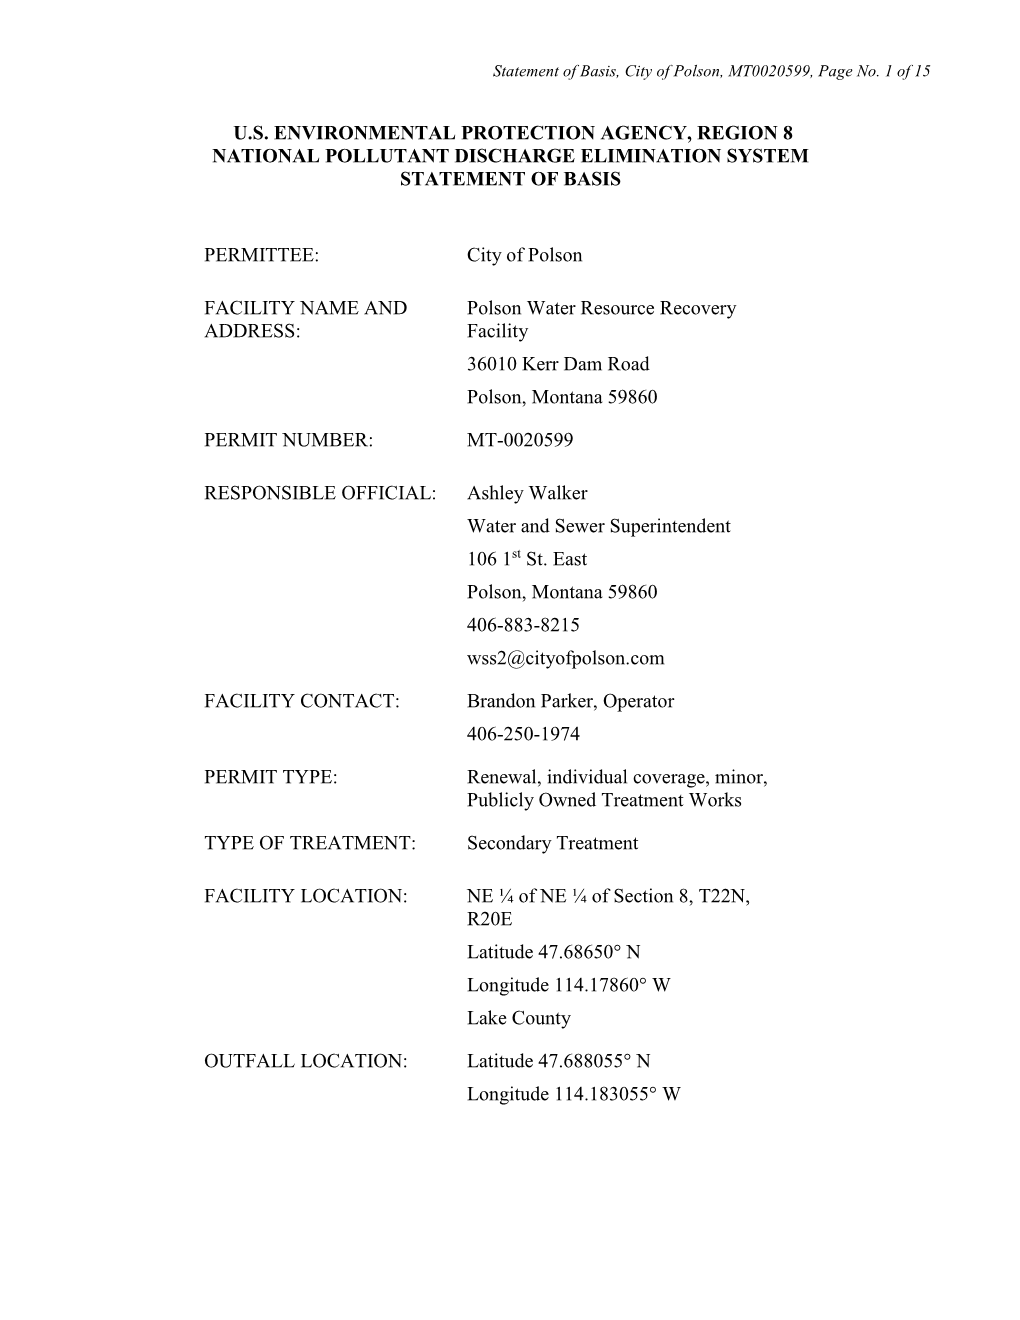 MT0020559 City of Polson Statement of Basis for Final Permit (Pdf)